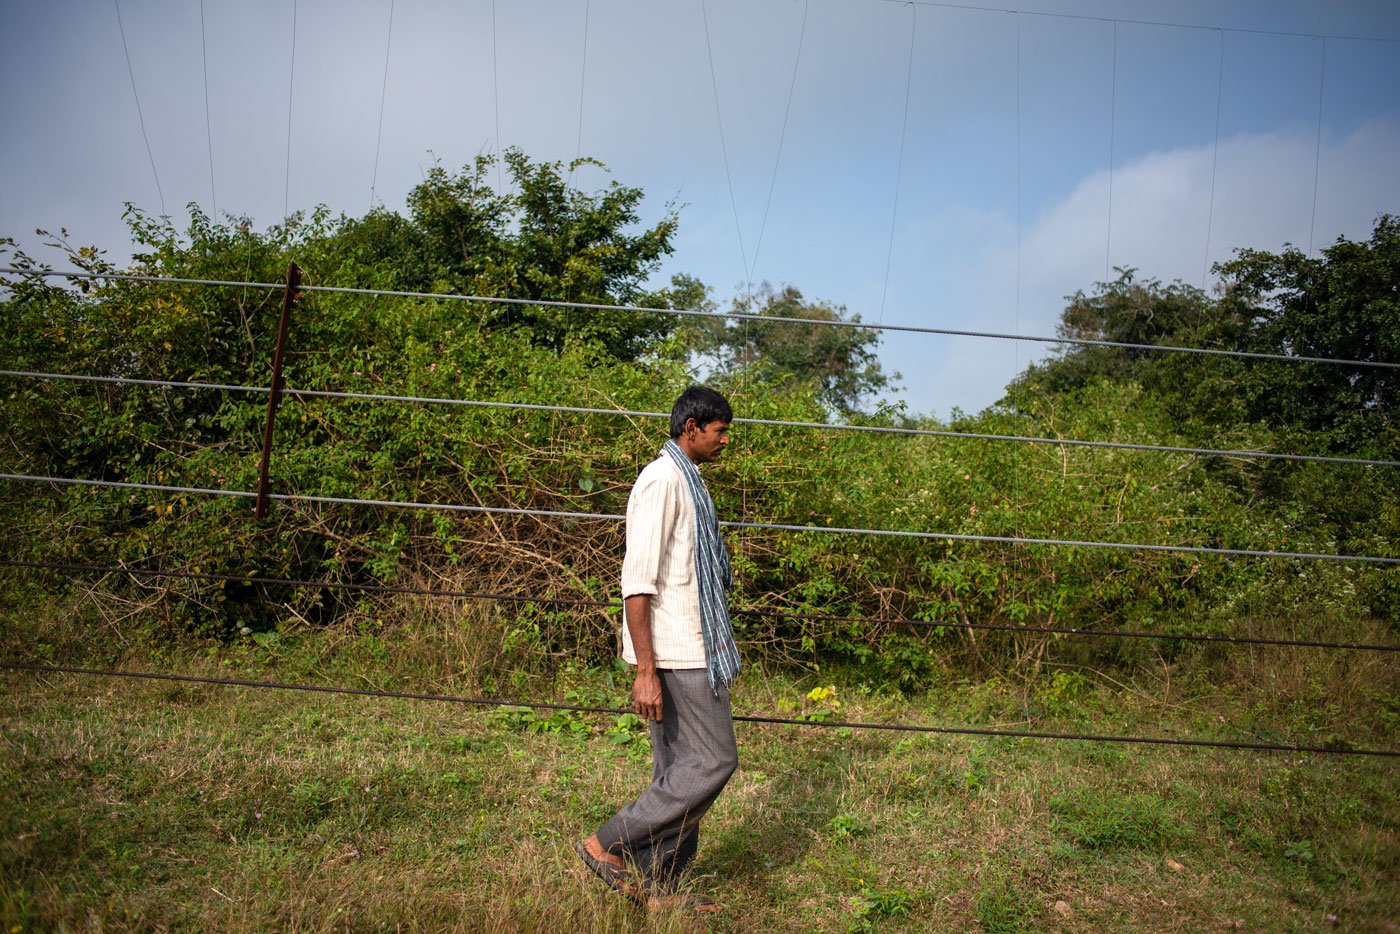 Anandaramu walking along the elephant fence and describing how it works